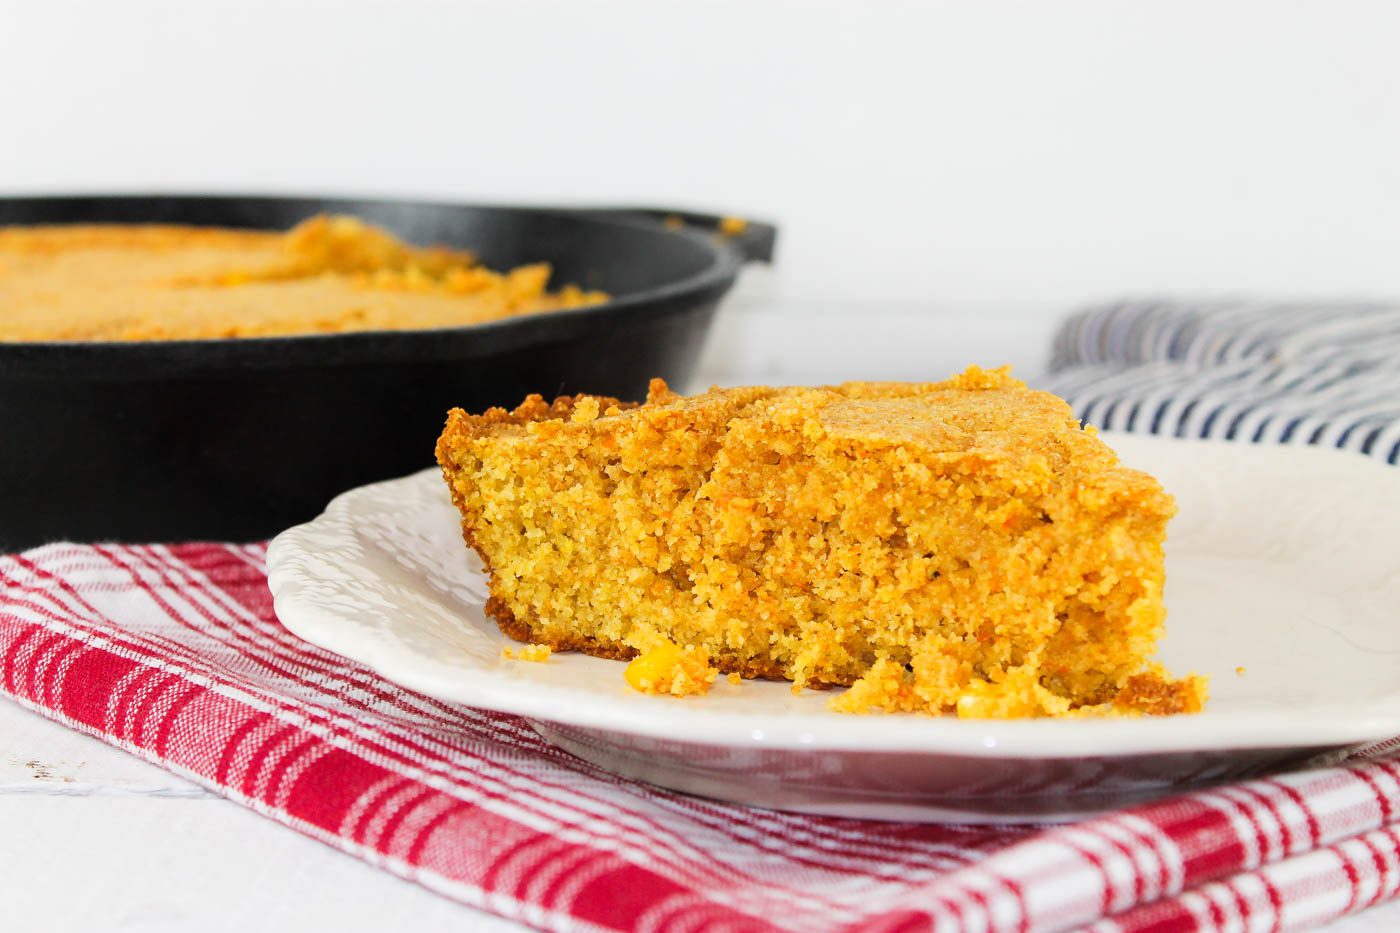 slice of cornbread sits on a plate in front of a lodge cast iron skillet